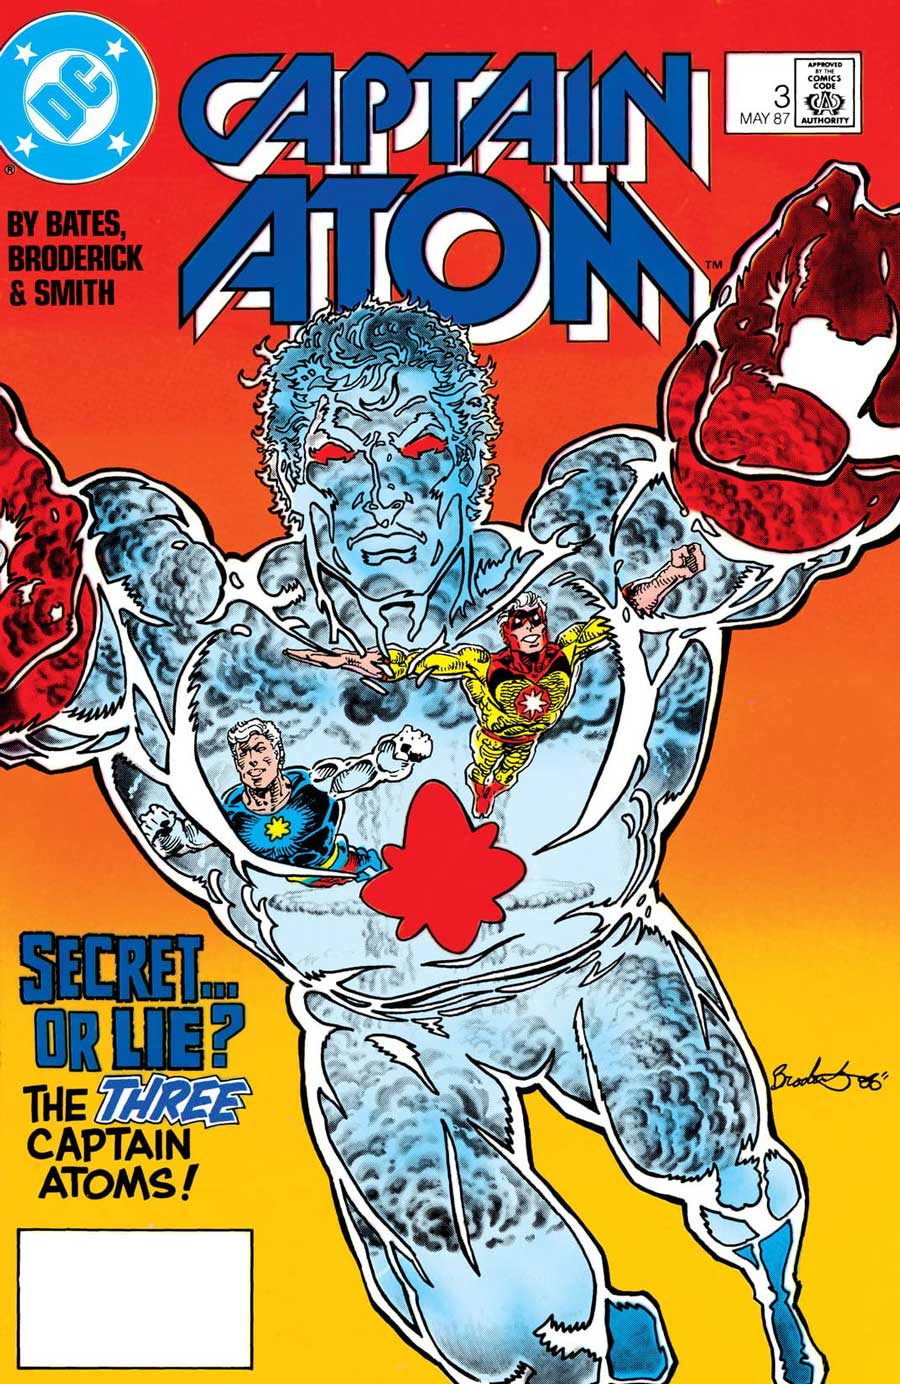 Captain Atom #3 - Blast From The Past released by DC Comics on May 1987